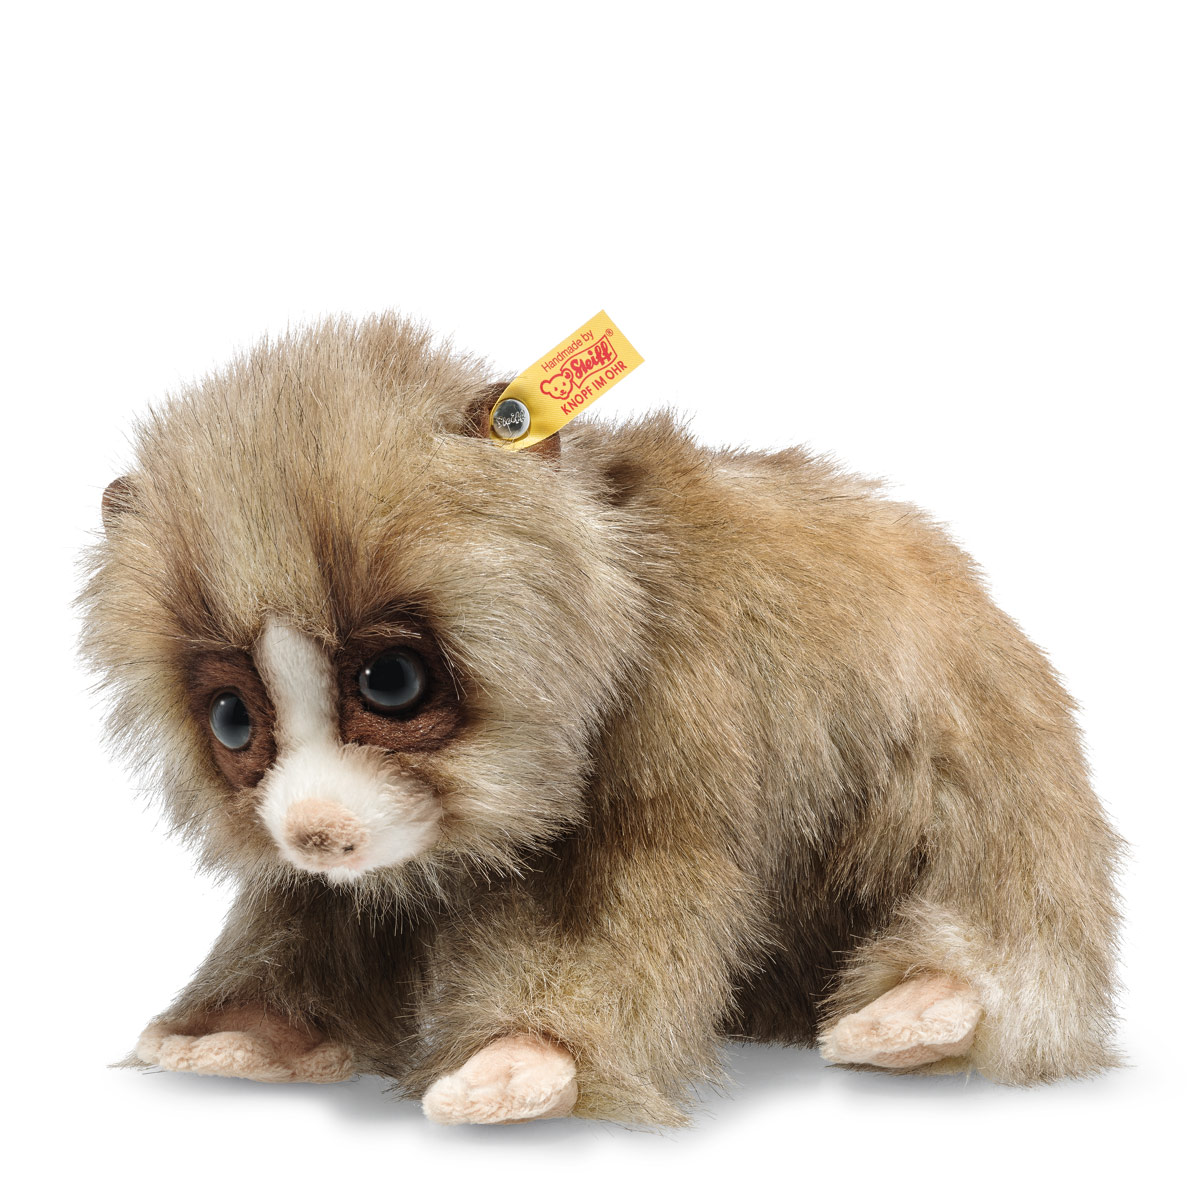 Steiff National Geographic Lio the Bengal Slow Loris Soft Toy